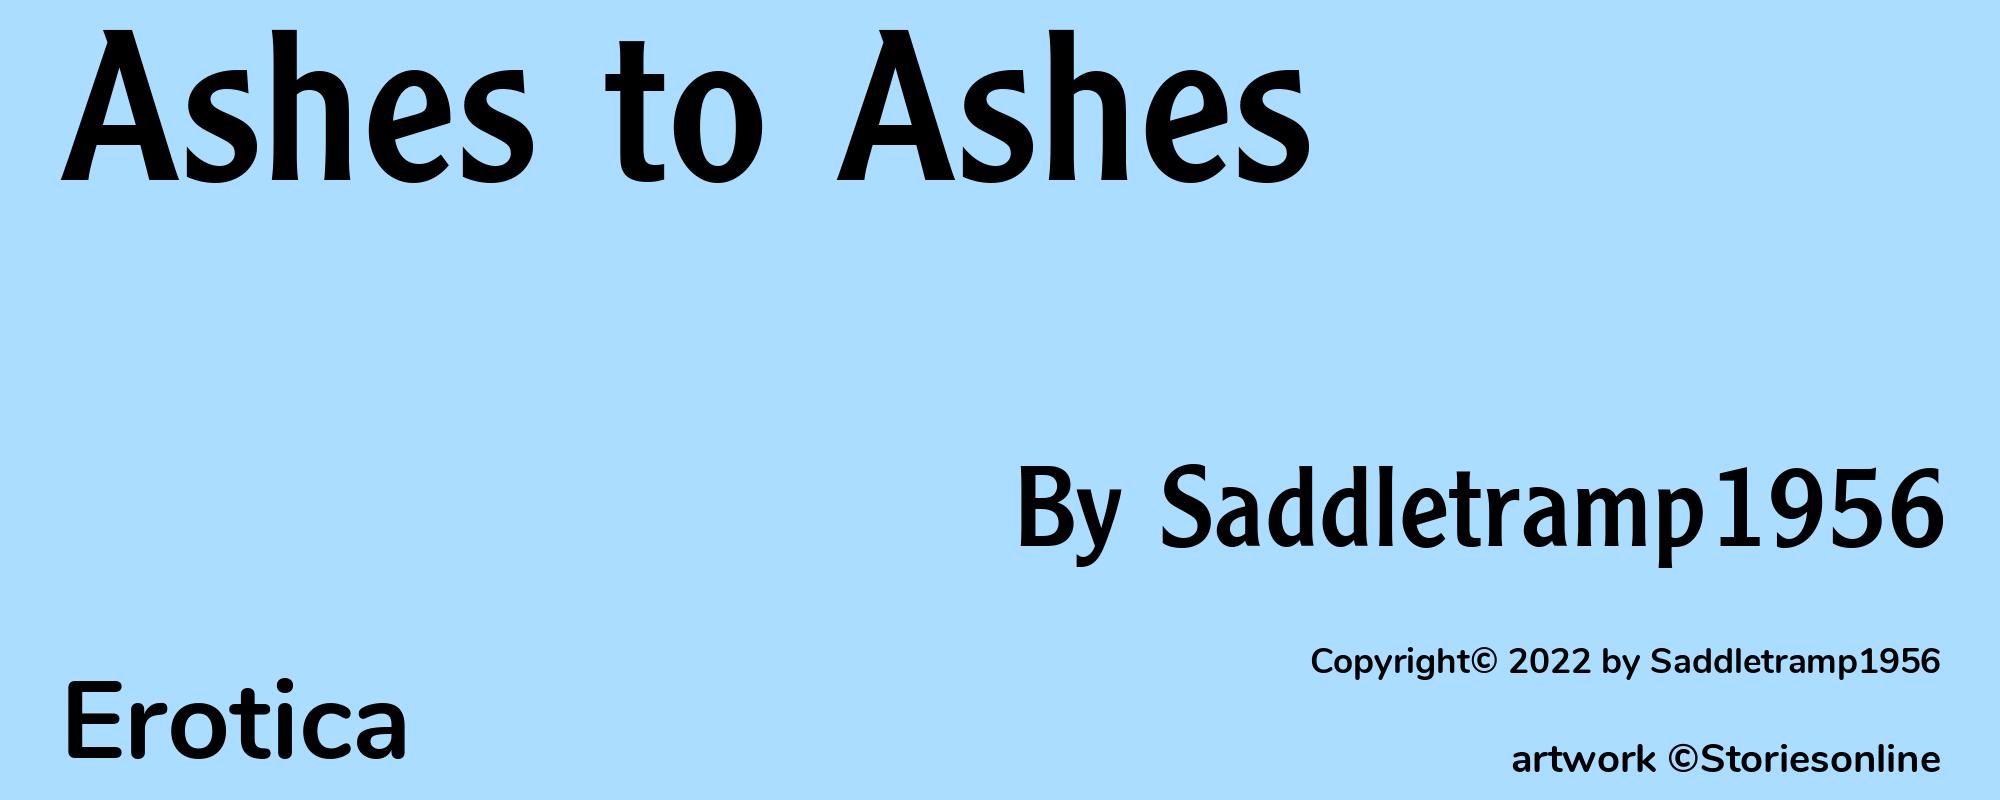 Ashes to Ashes - Cover